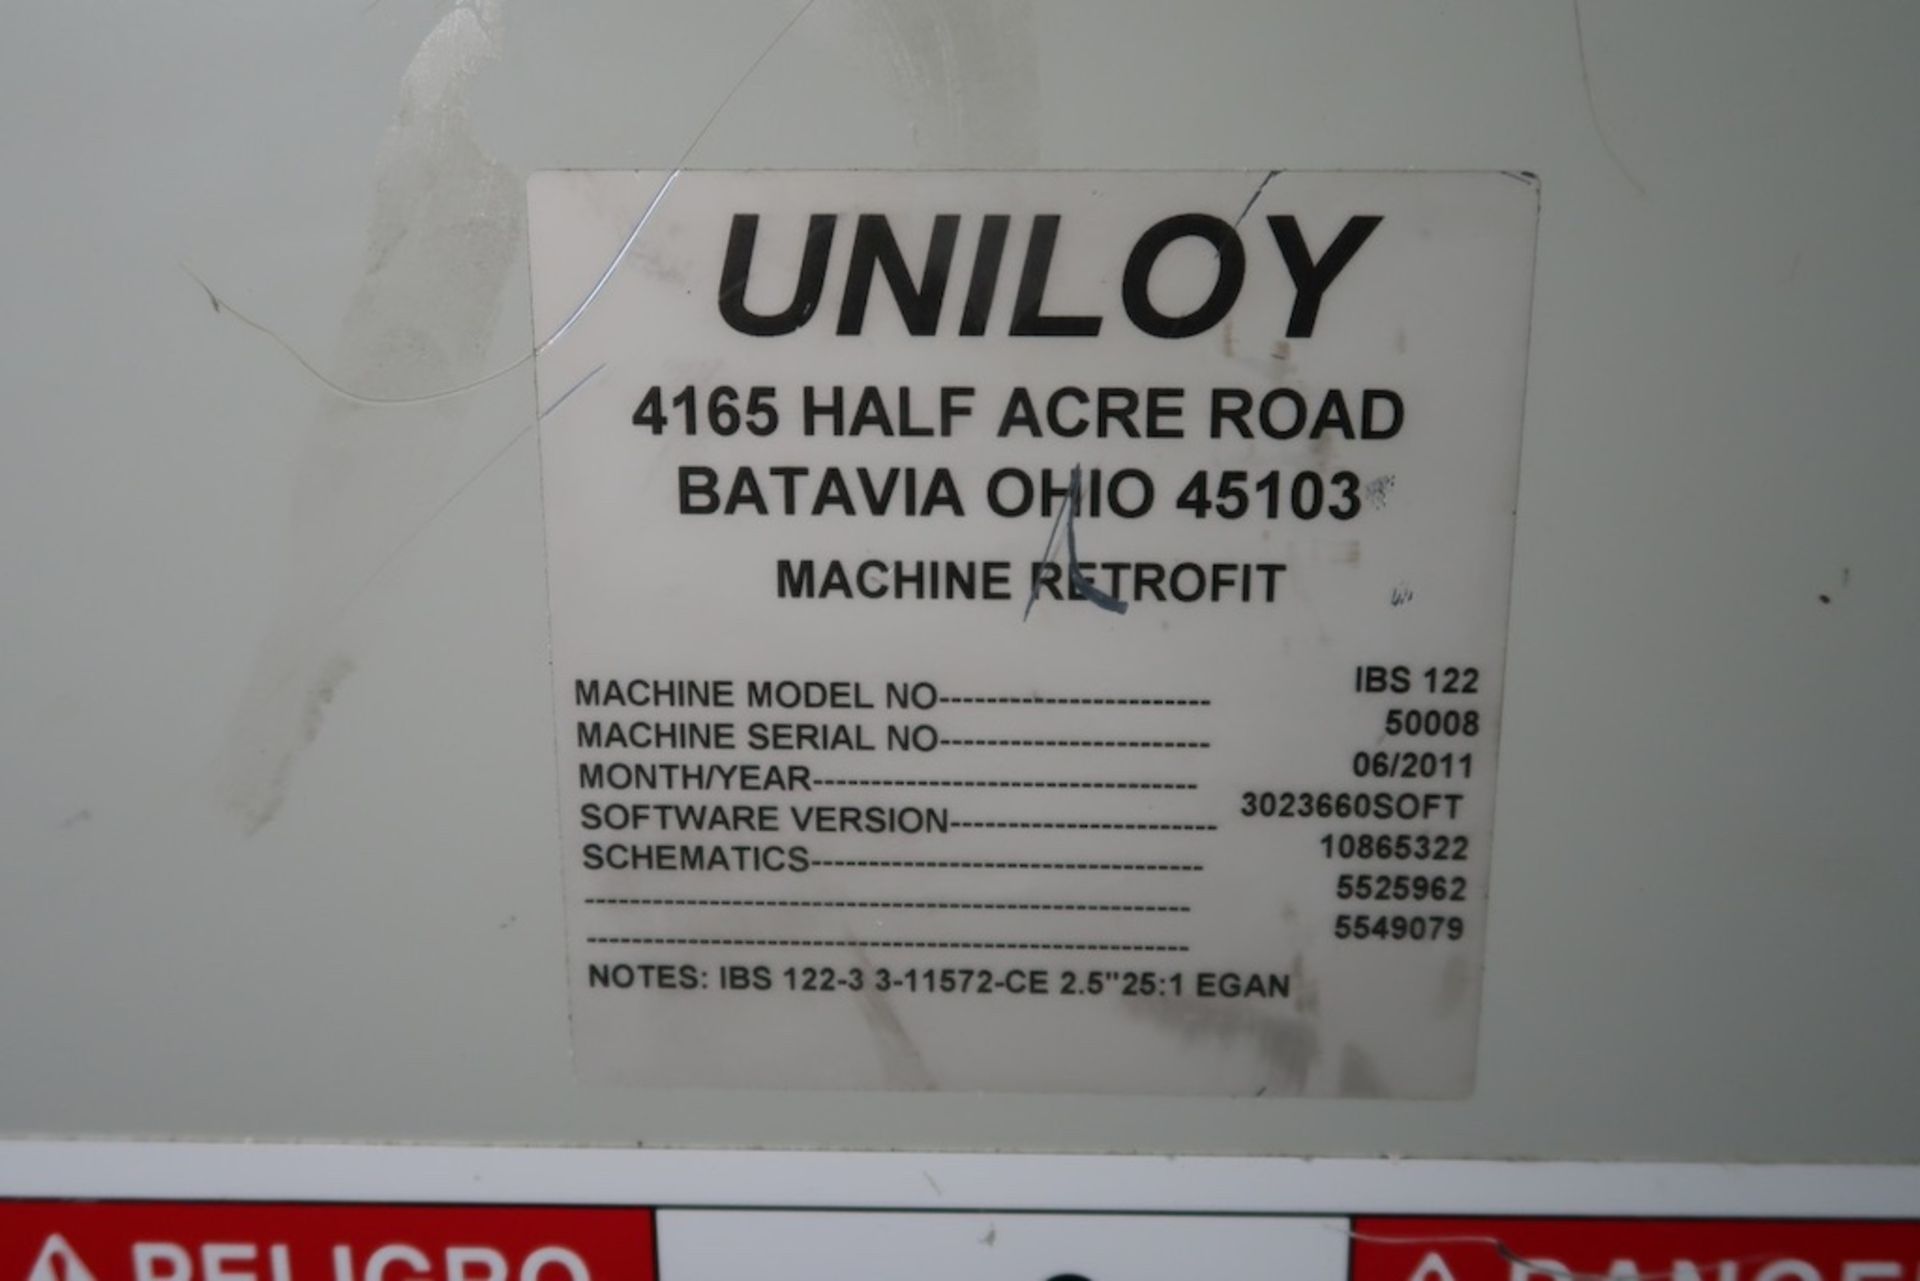 Uniloy IBS-122 Injection Blow Molding Machine, Rebuilt in 2011 - Image 18 of 18